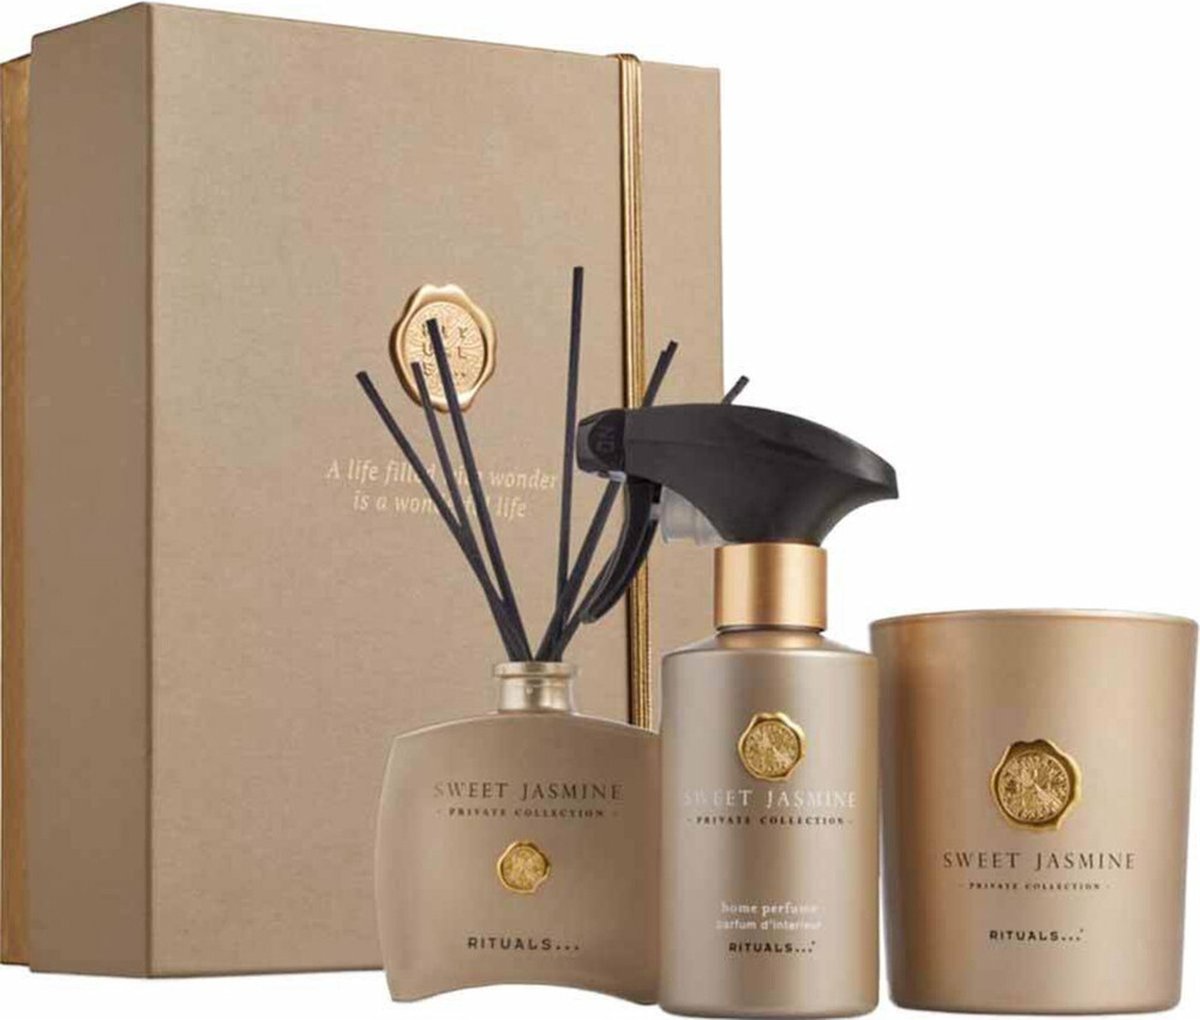 Rituals Private Collection Giftset L Sweet Jasmine 1 set - RITUALS